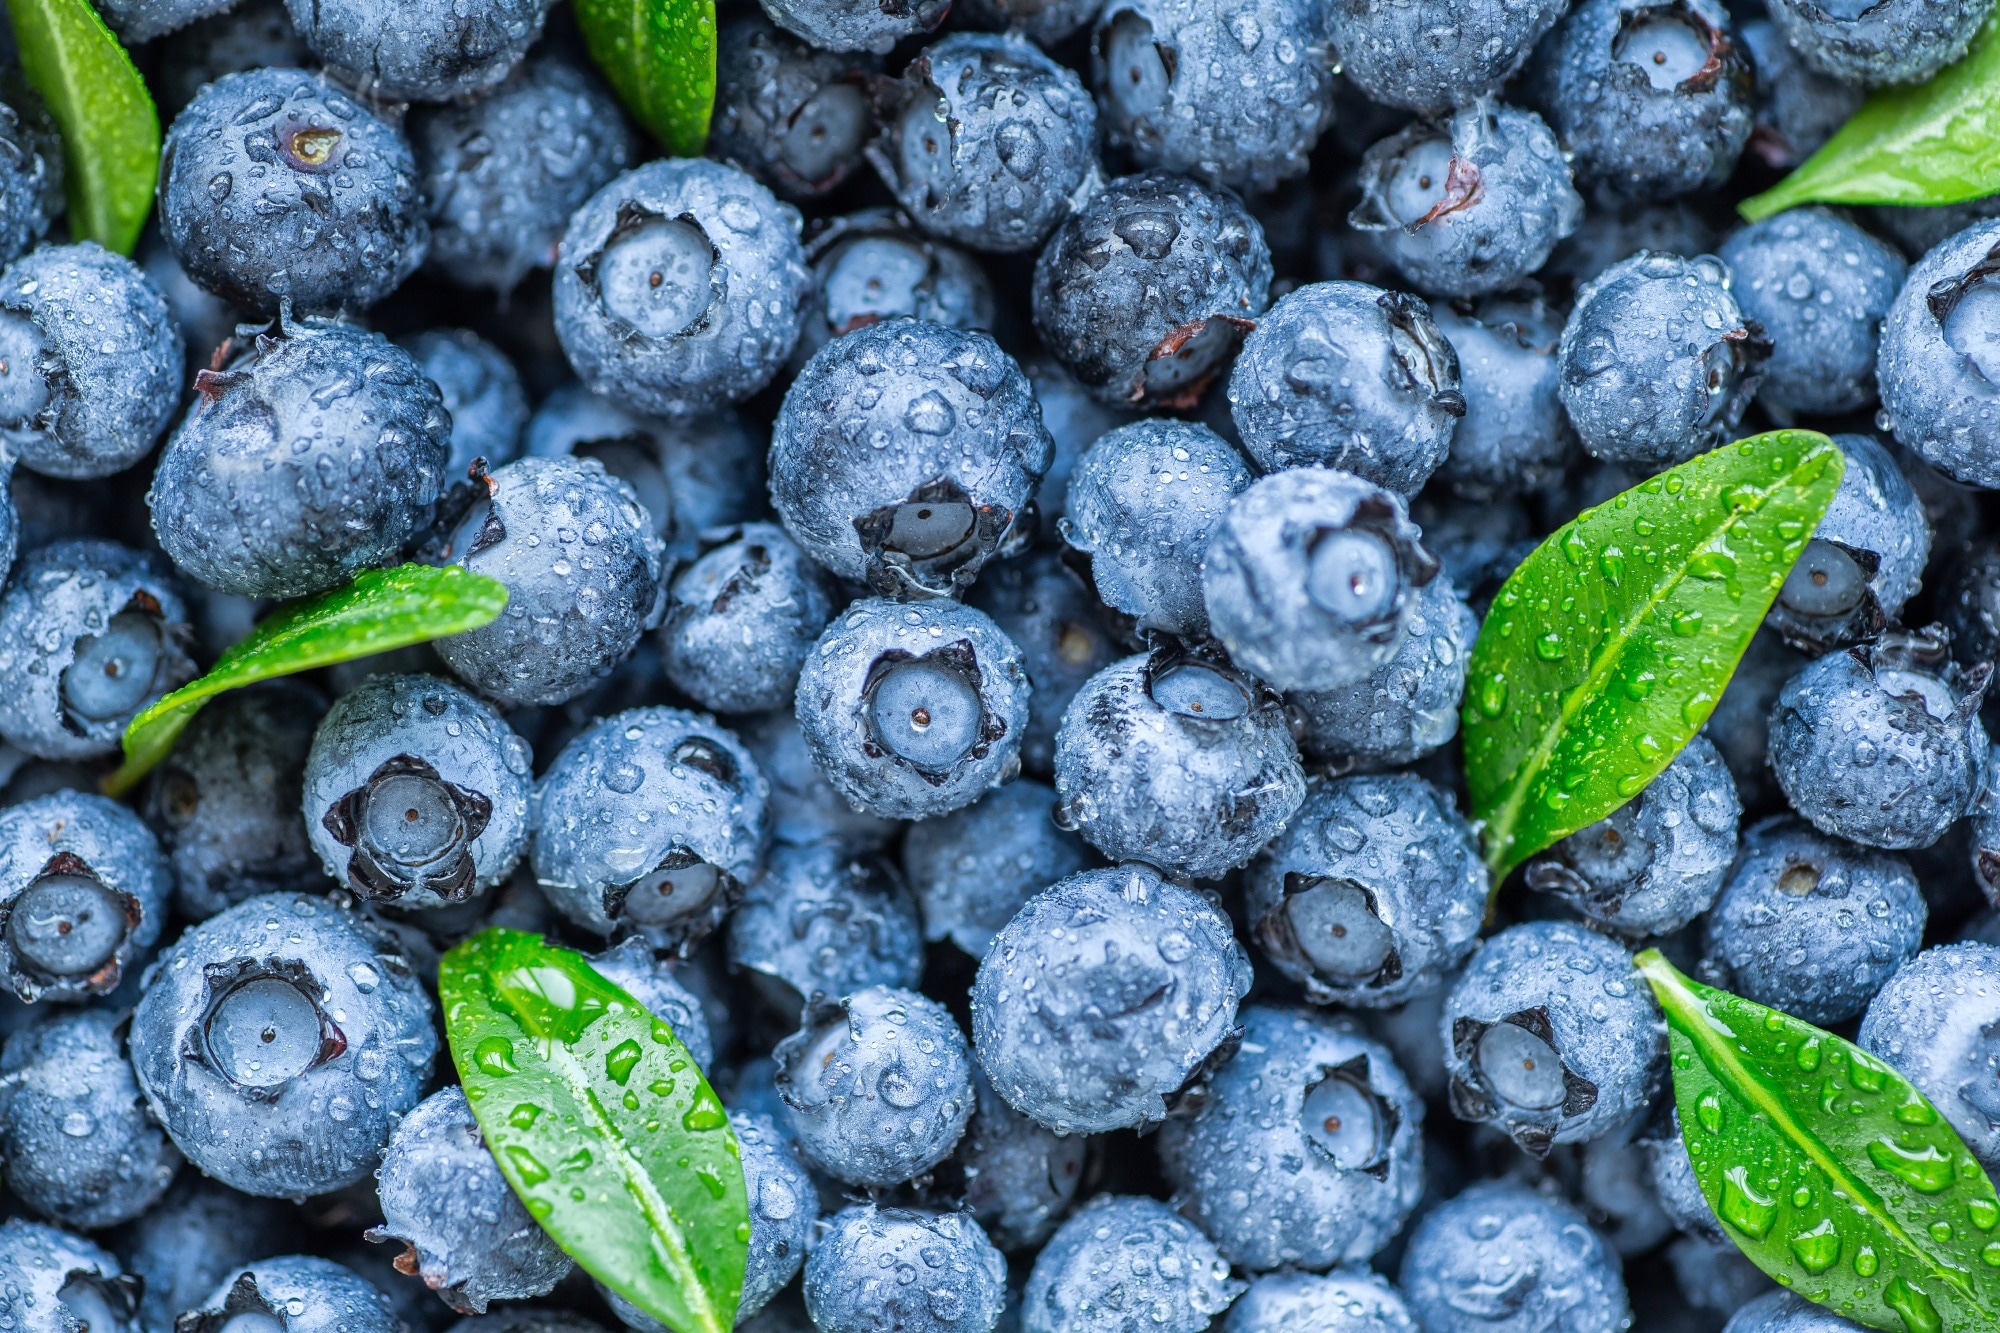 Study: Are the Blueberries We Buy Good Quality? Comparative Study of Berries Purchased from Different Outlets. Image Credit: BukhtaYurii/Shutterstock.com